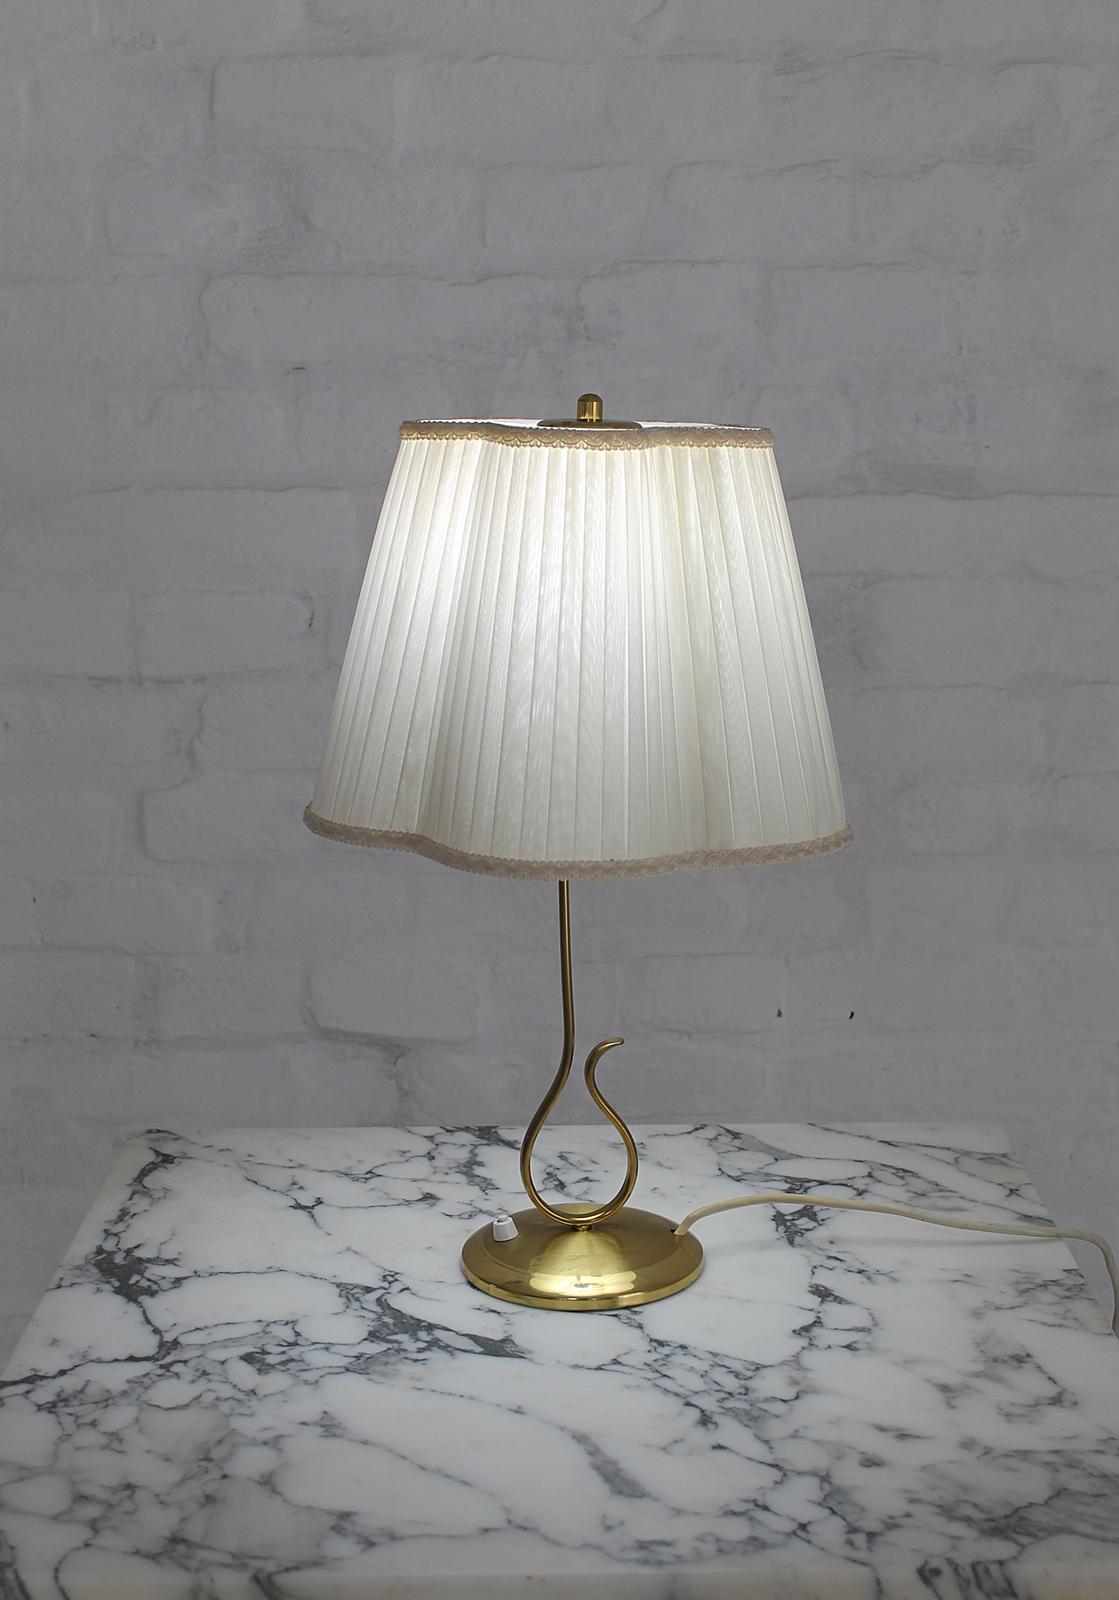 Very rare and stylish brass table lamp from the late 1940s-early 1950s.
Two tone brass base and flower shaped lampshade. 
Fantastic signed handwork, in very good condition
1 bulb E27, 1 x 100 watt maximum, 110/220 volt.
 Any type of light bulb can